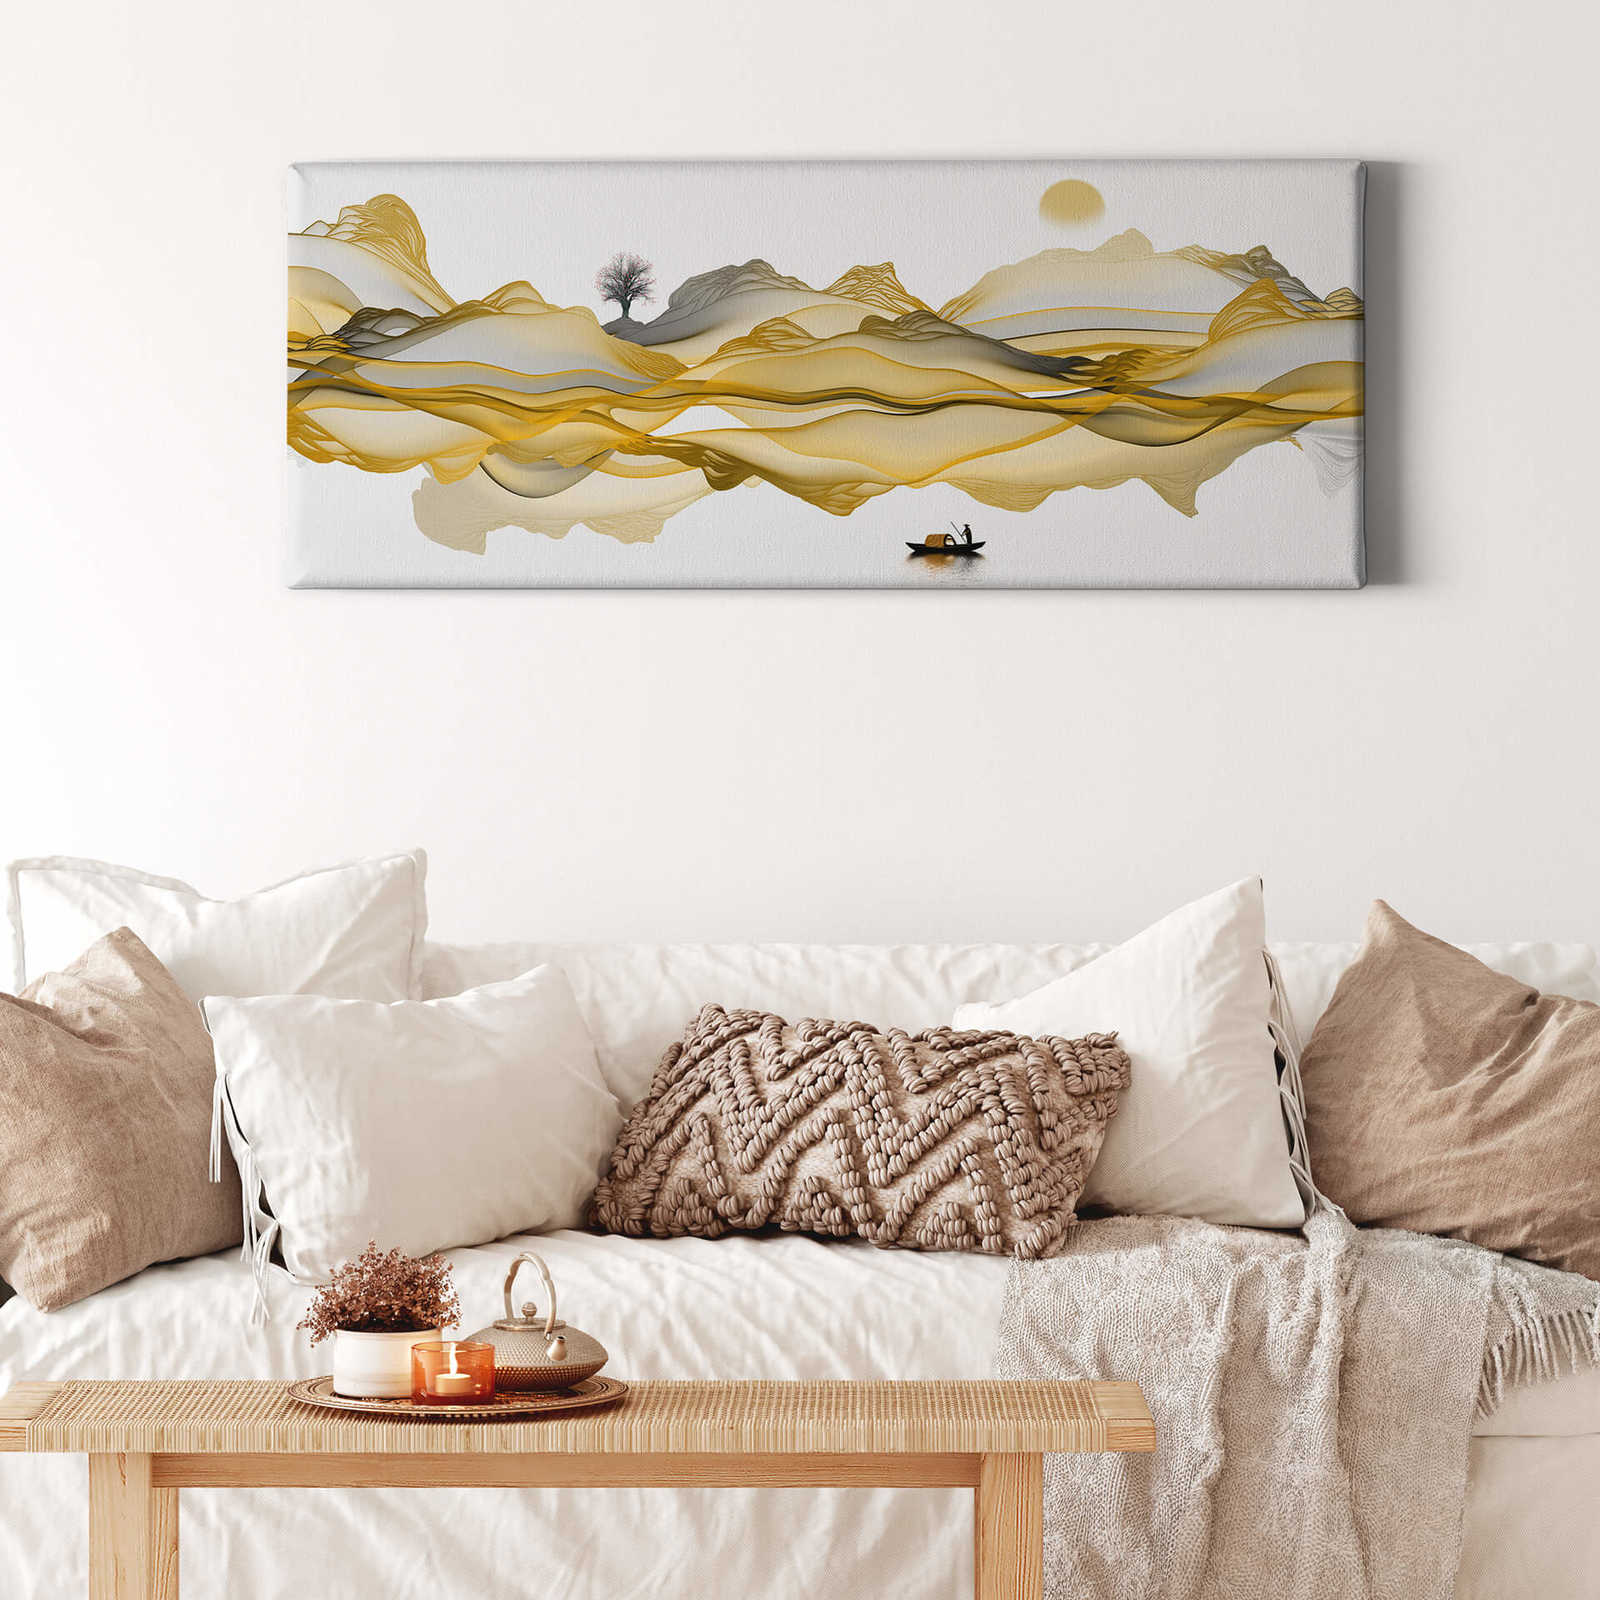             Panorama canvas print abstract landscape in gold, grey
        